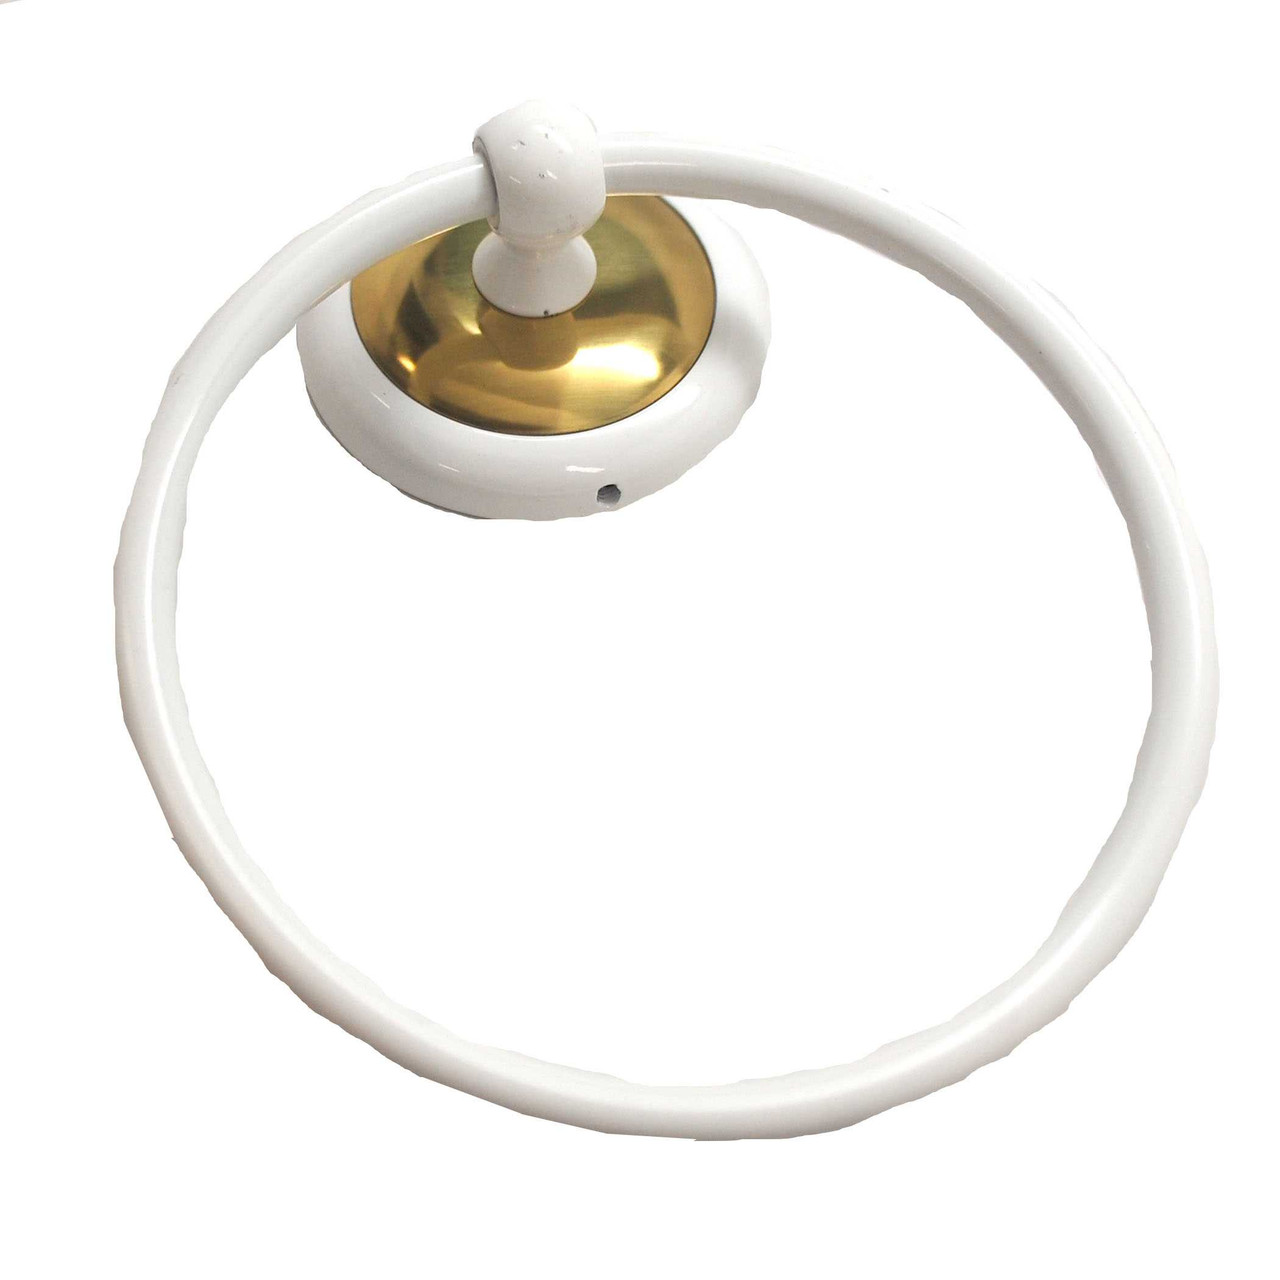 https://cdn11.bigcommerce.com/s-1xpphv/images/stencil/1280x1280/products/796/14386/AMEROCK-6-Hanging-Towel-Ring-White-Brass_5698__80005.1674494415.JPG?c=2